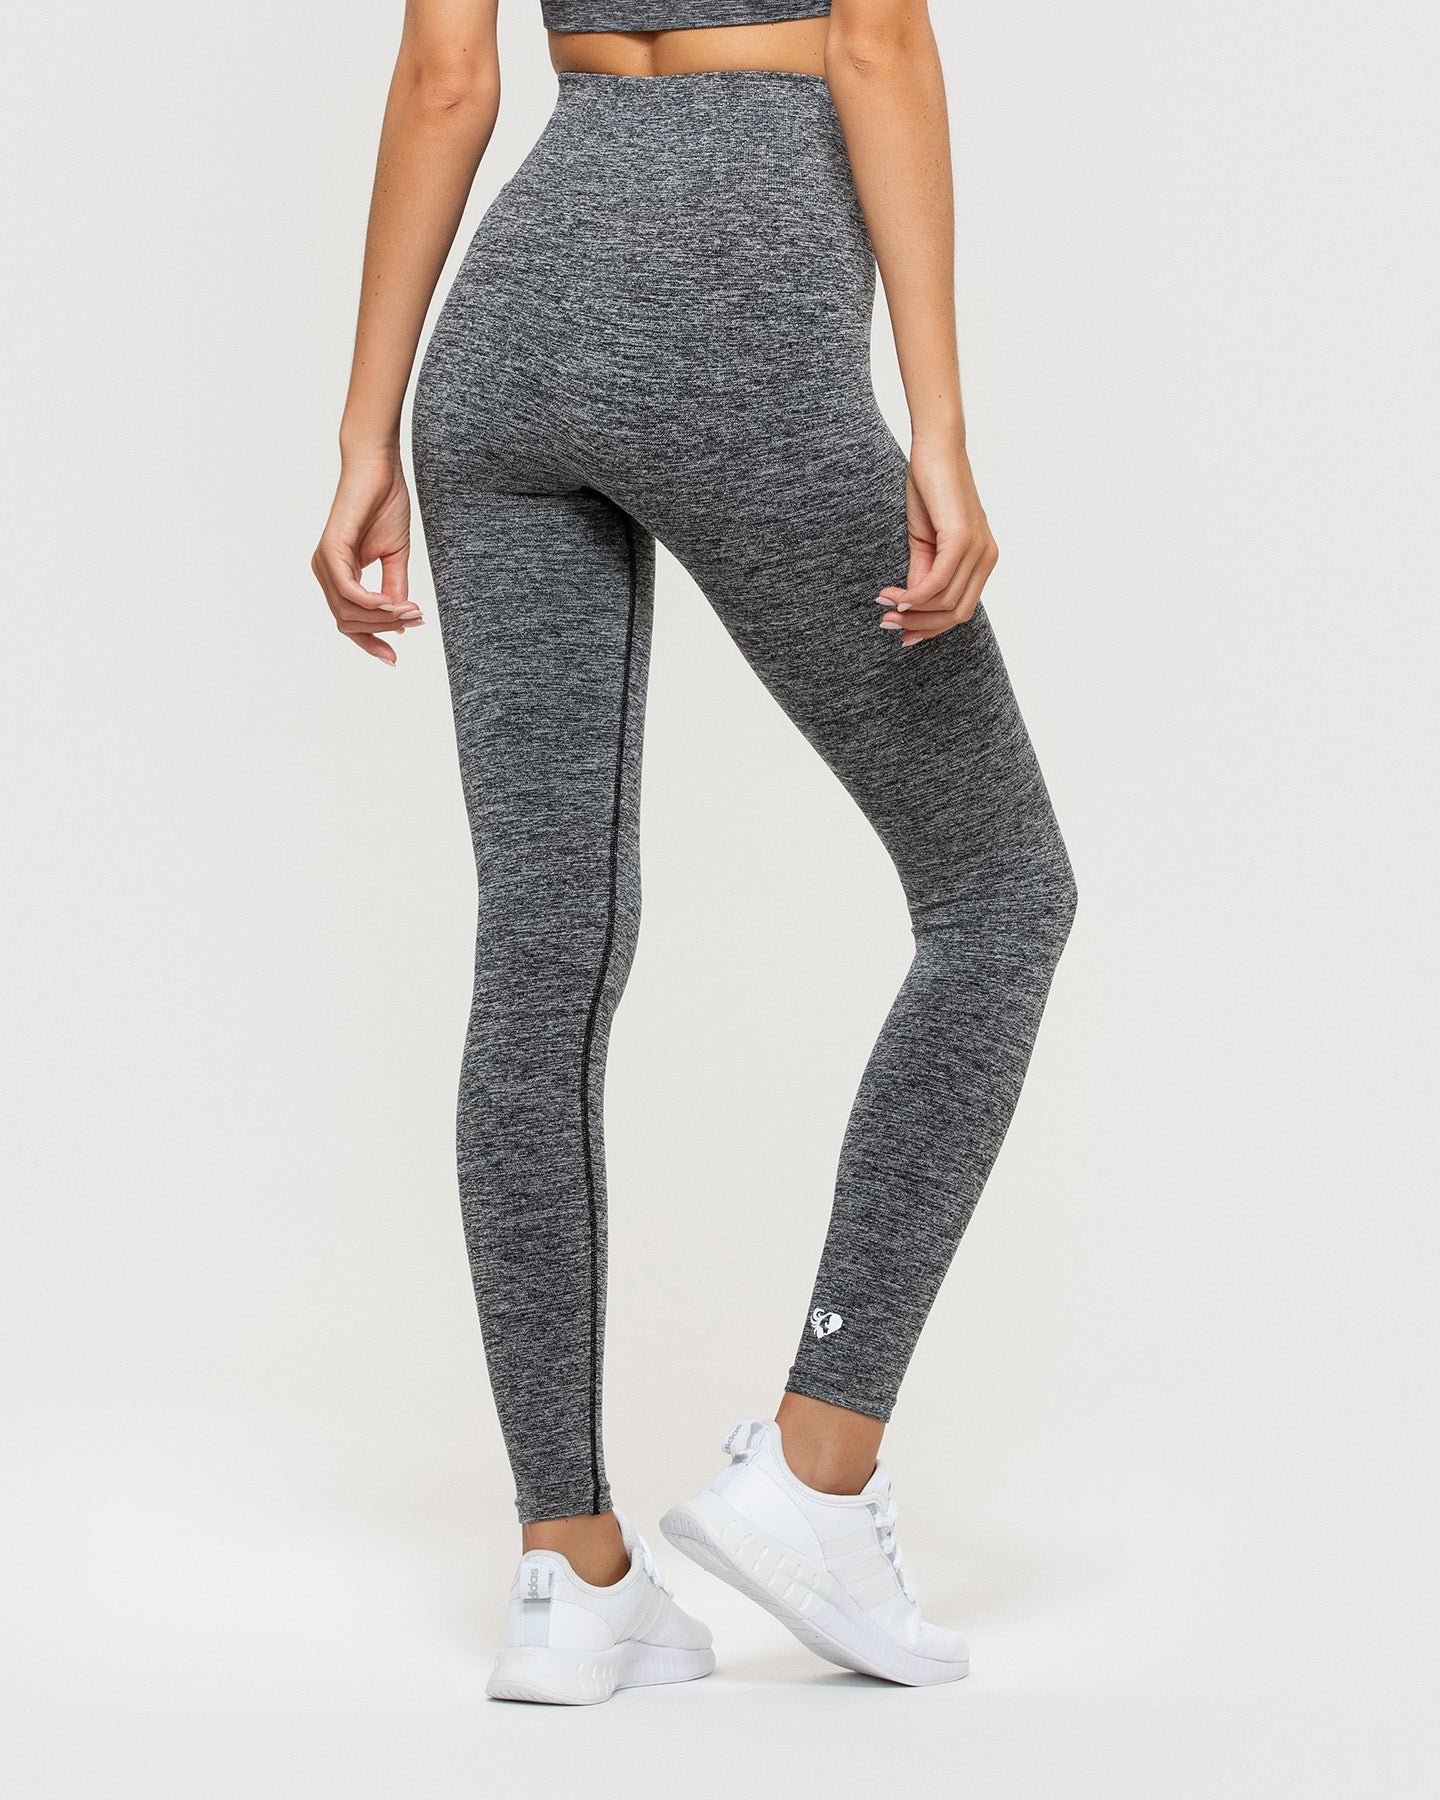 Women's best leggings for sale in Co. Clare for €50 on DoneDeal